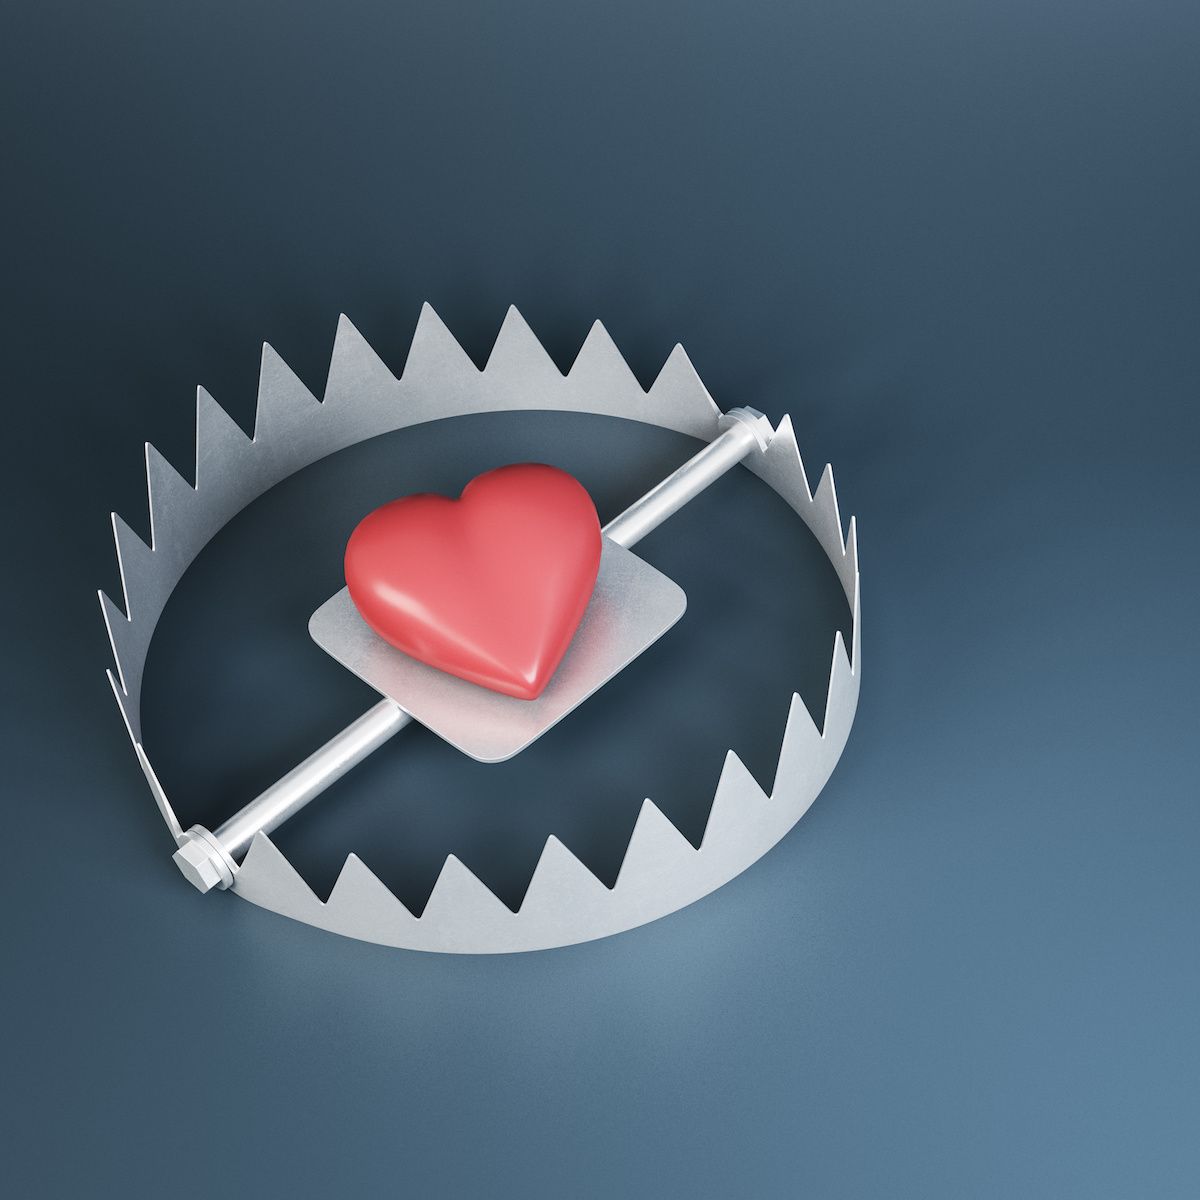 A red heart sits in the middle of a steel bear trap to signify catfishing and other romance scams